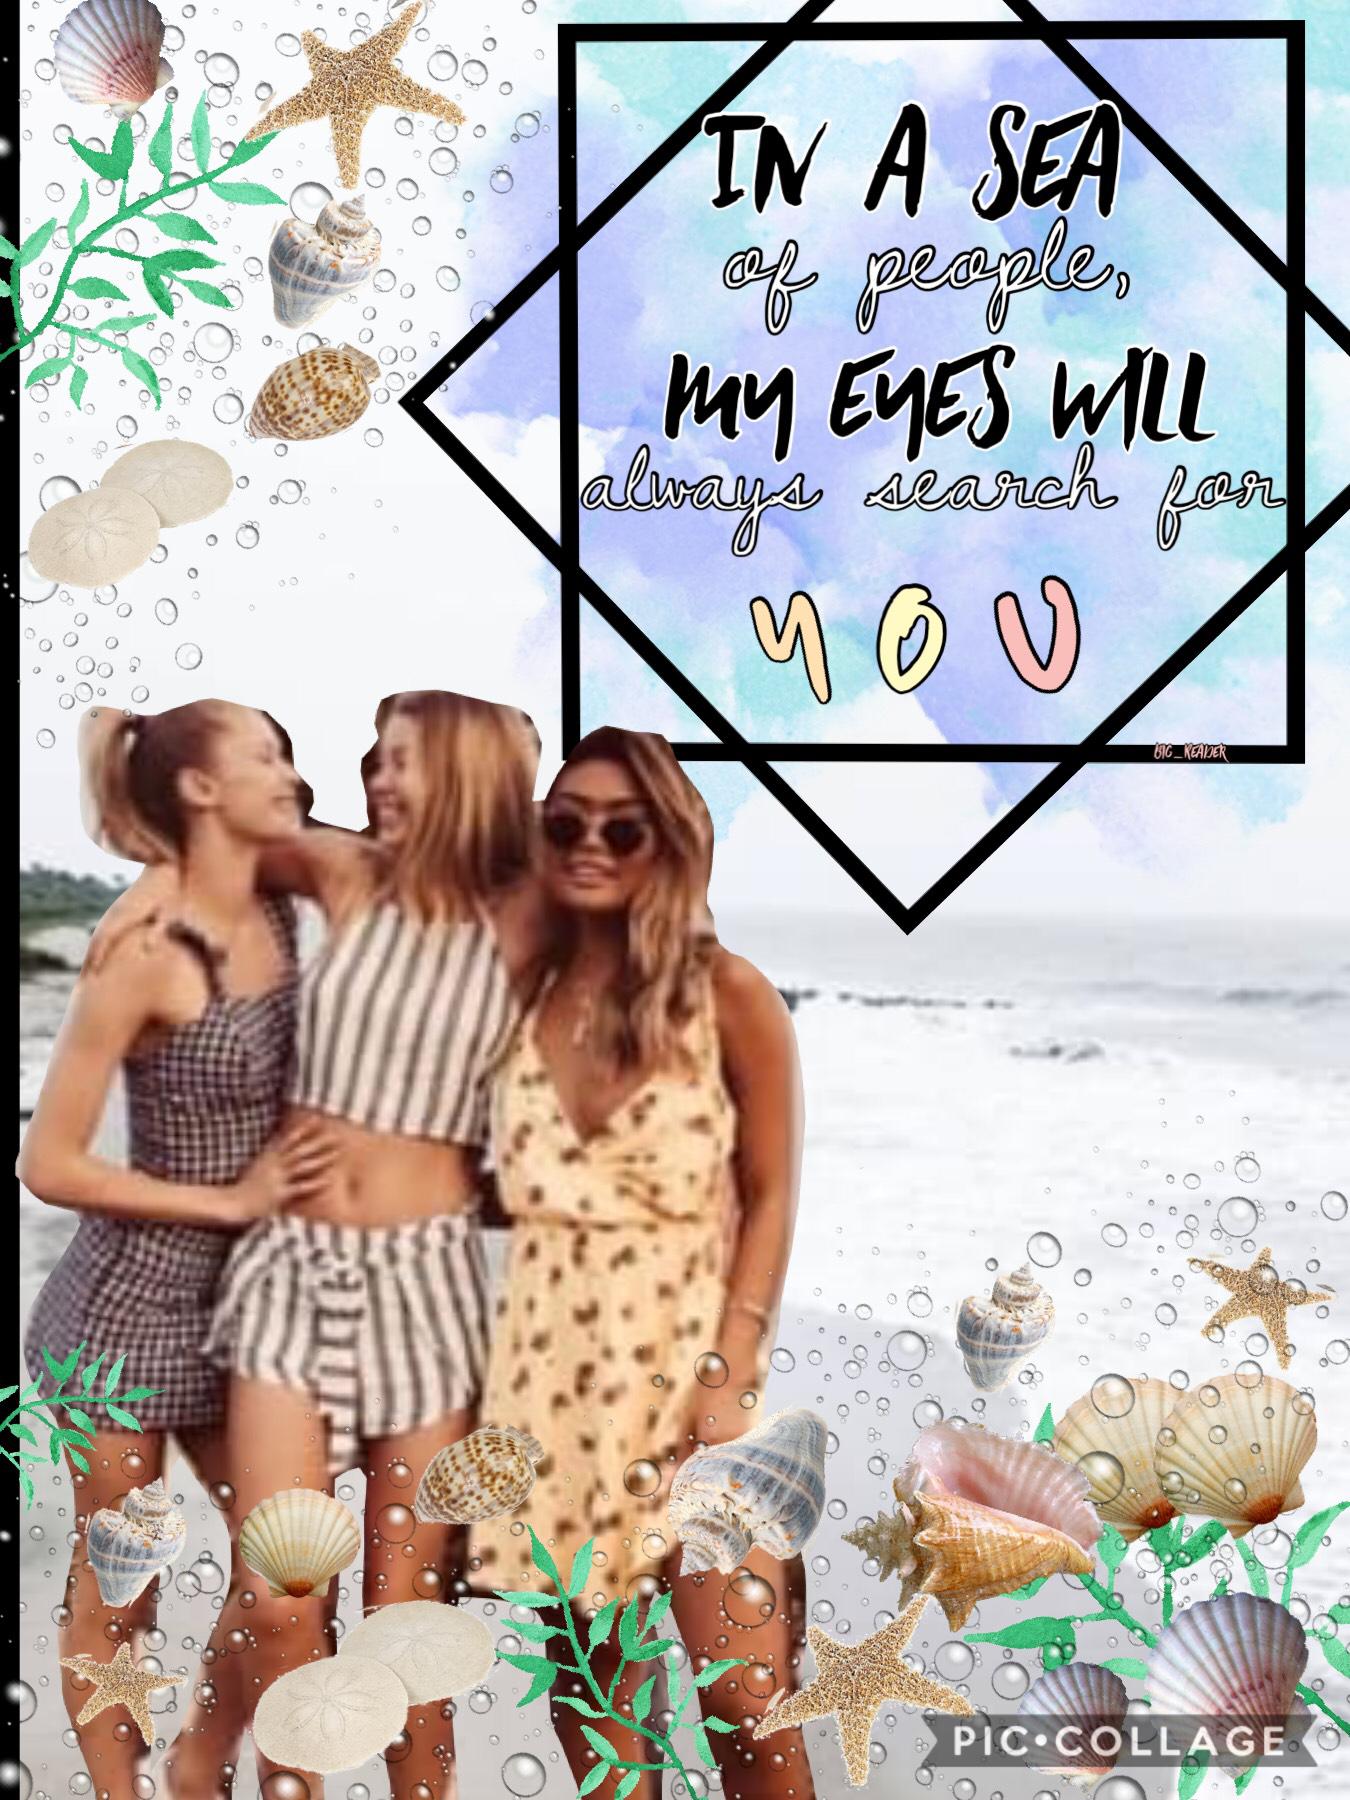 Hope y’all like this! Fun fact: this collage took me over 30 minutes 😂😂 but oh well, please rate /10💕💕 For more awesome-ness check out my extras account! Big_Reader_extras ! 🎉🙏🏼🌸 QOTD: 🏖 or 🏝 AOTD:🏝